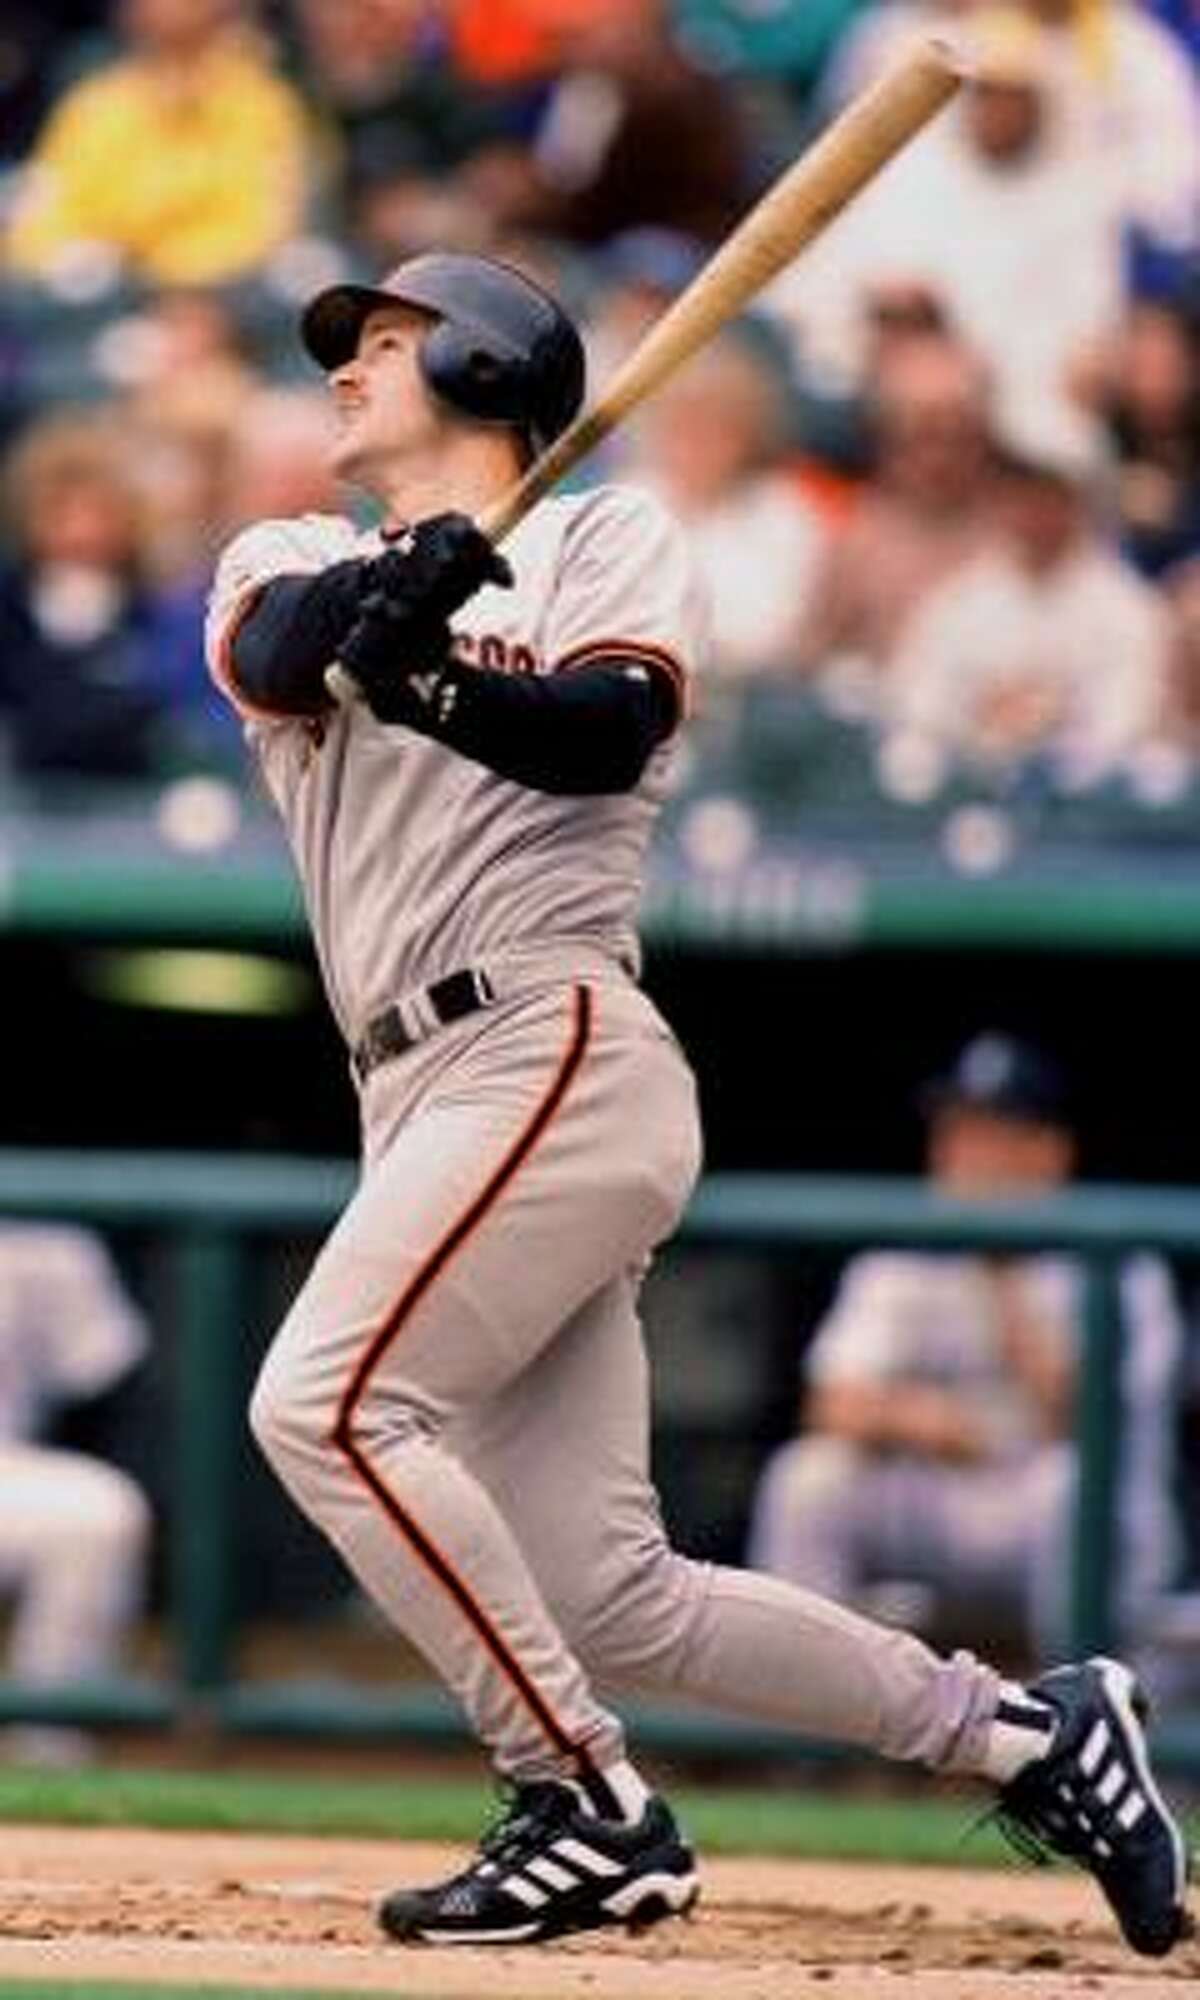 1999: Jeff Kent batted .290 with 23 homers and 101 RBIs for the Giants. He was named to his first All-Star team.